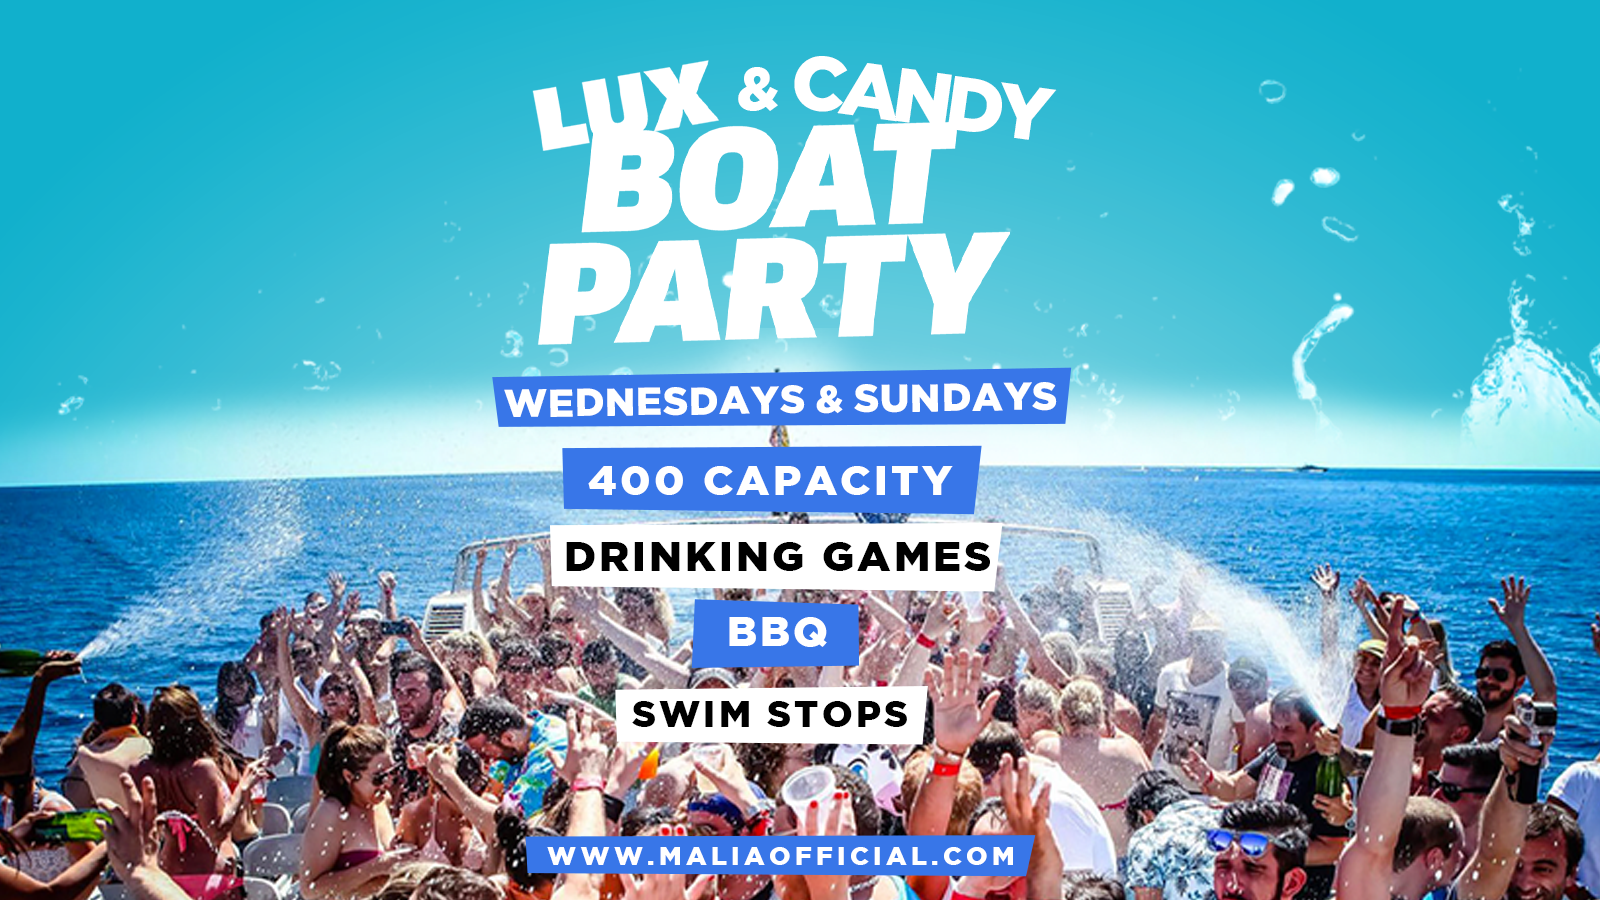 Lux & Candy Boat Party